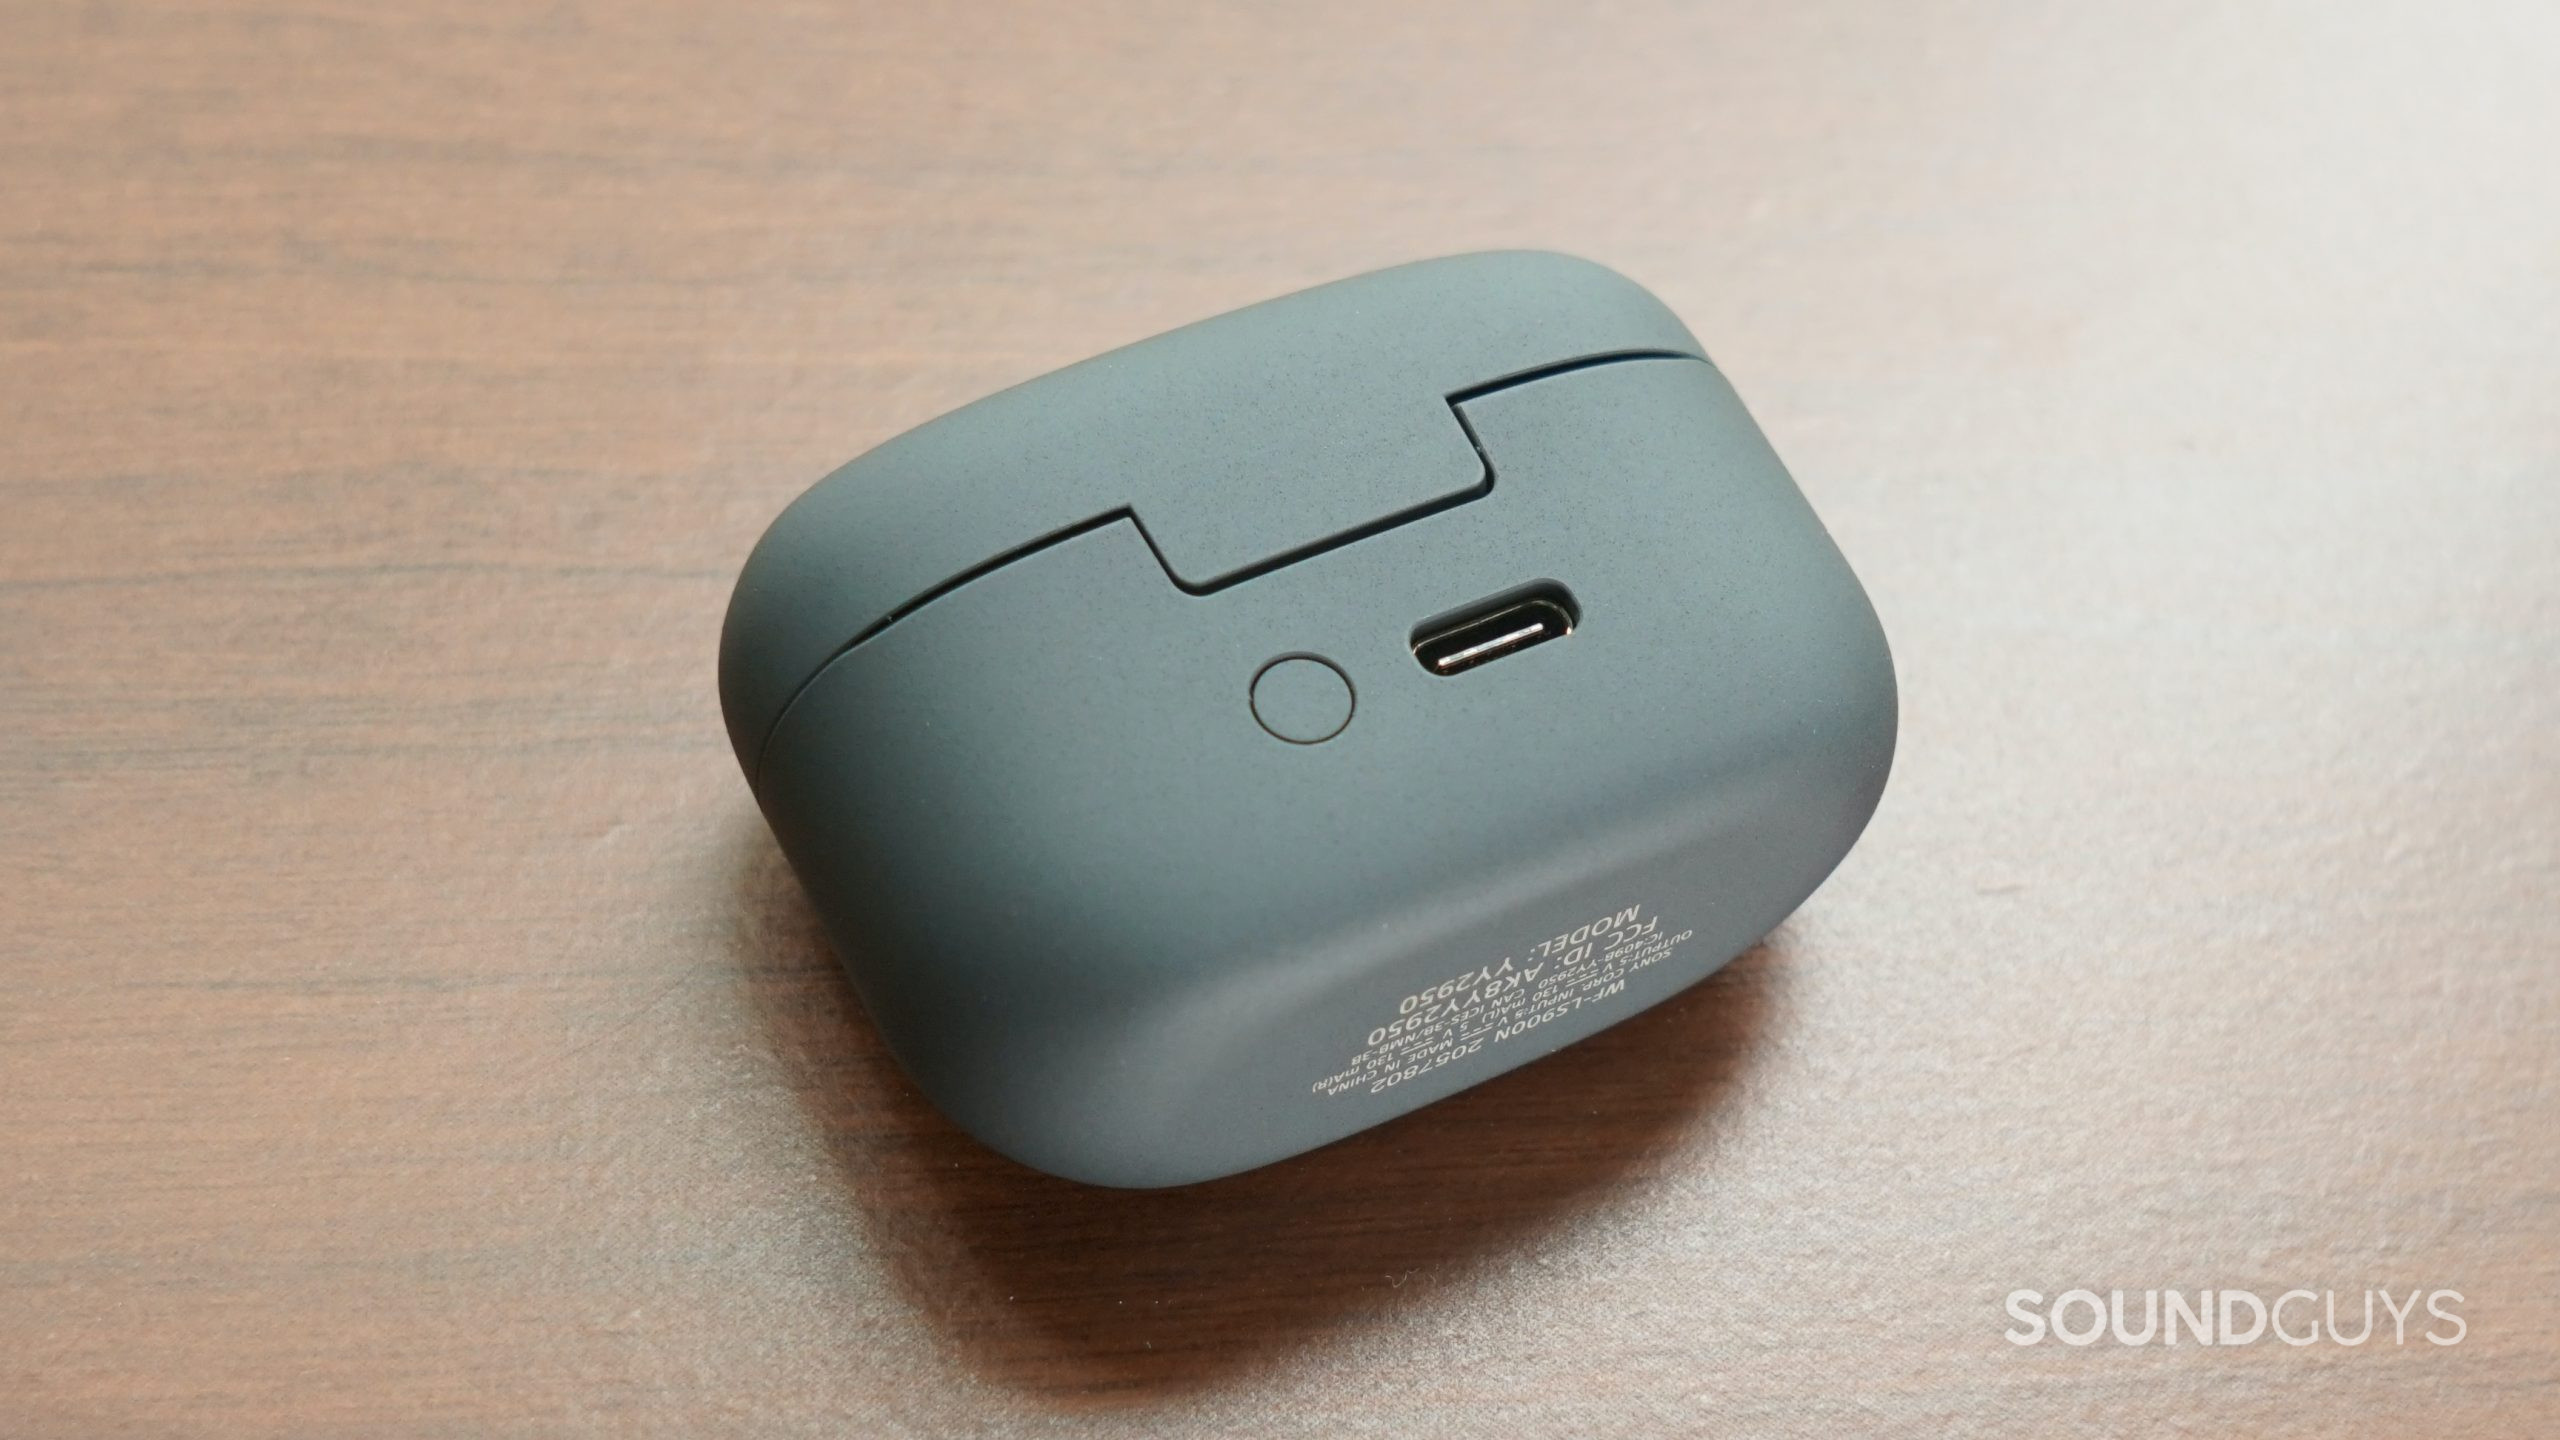 The Sony LinkBuds S case lays on its side with its charging port facing up.